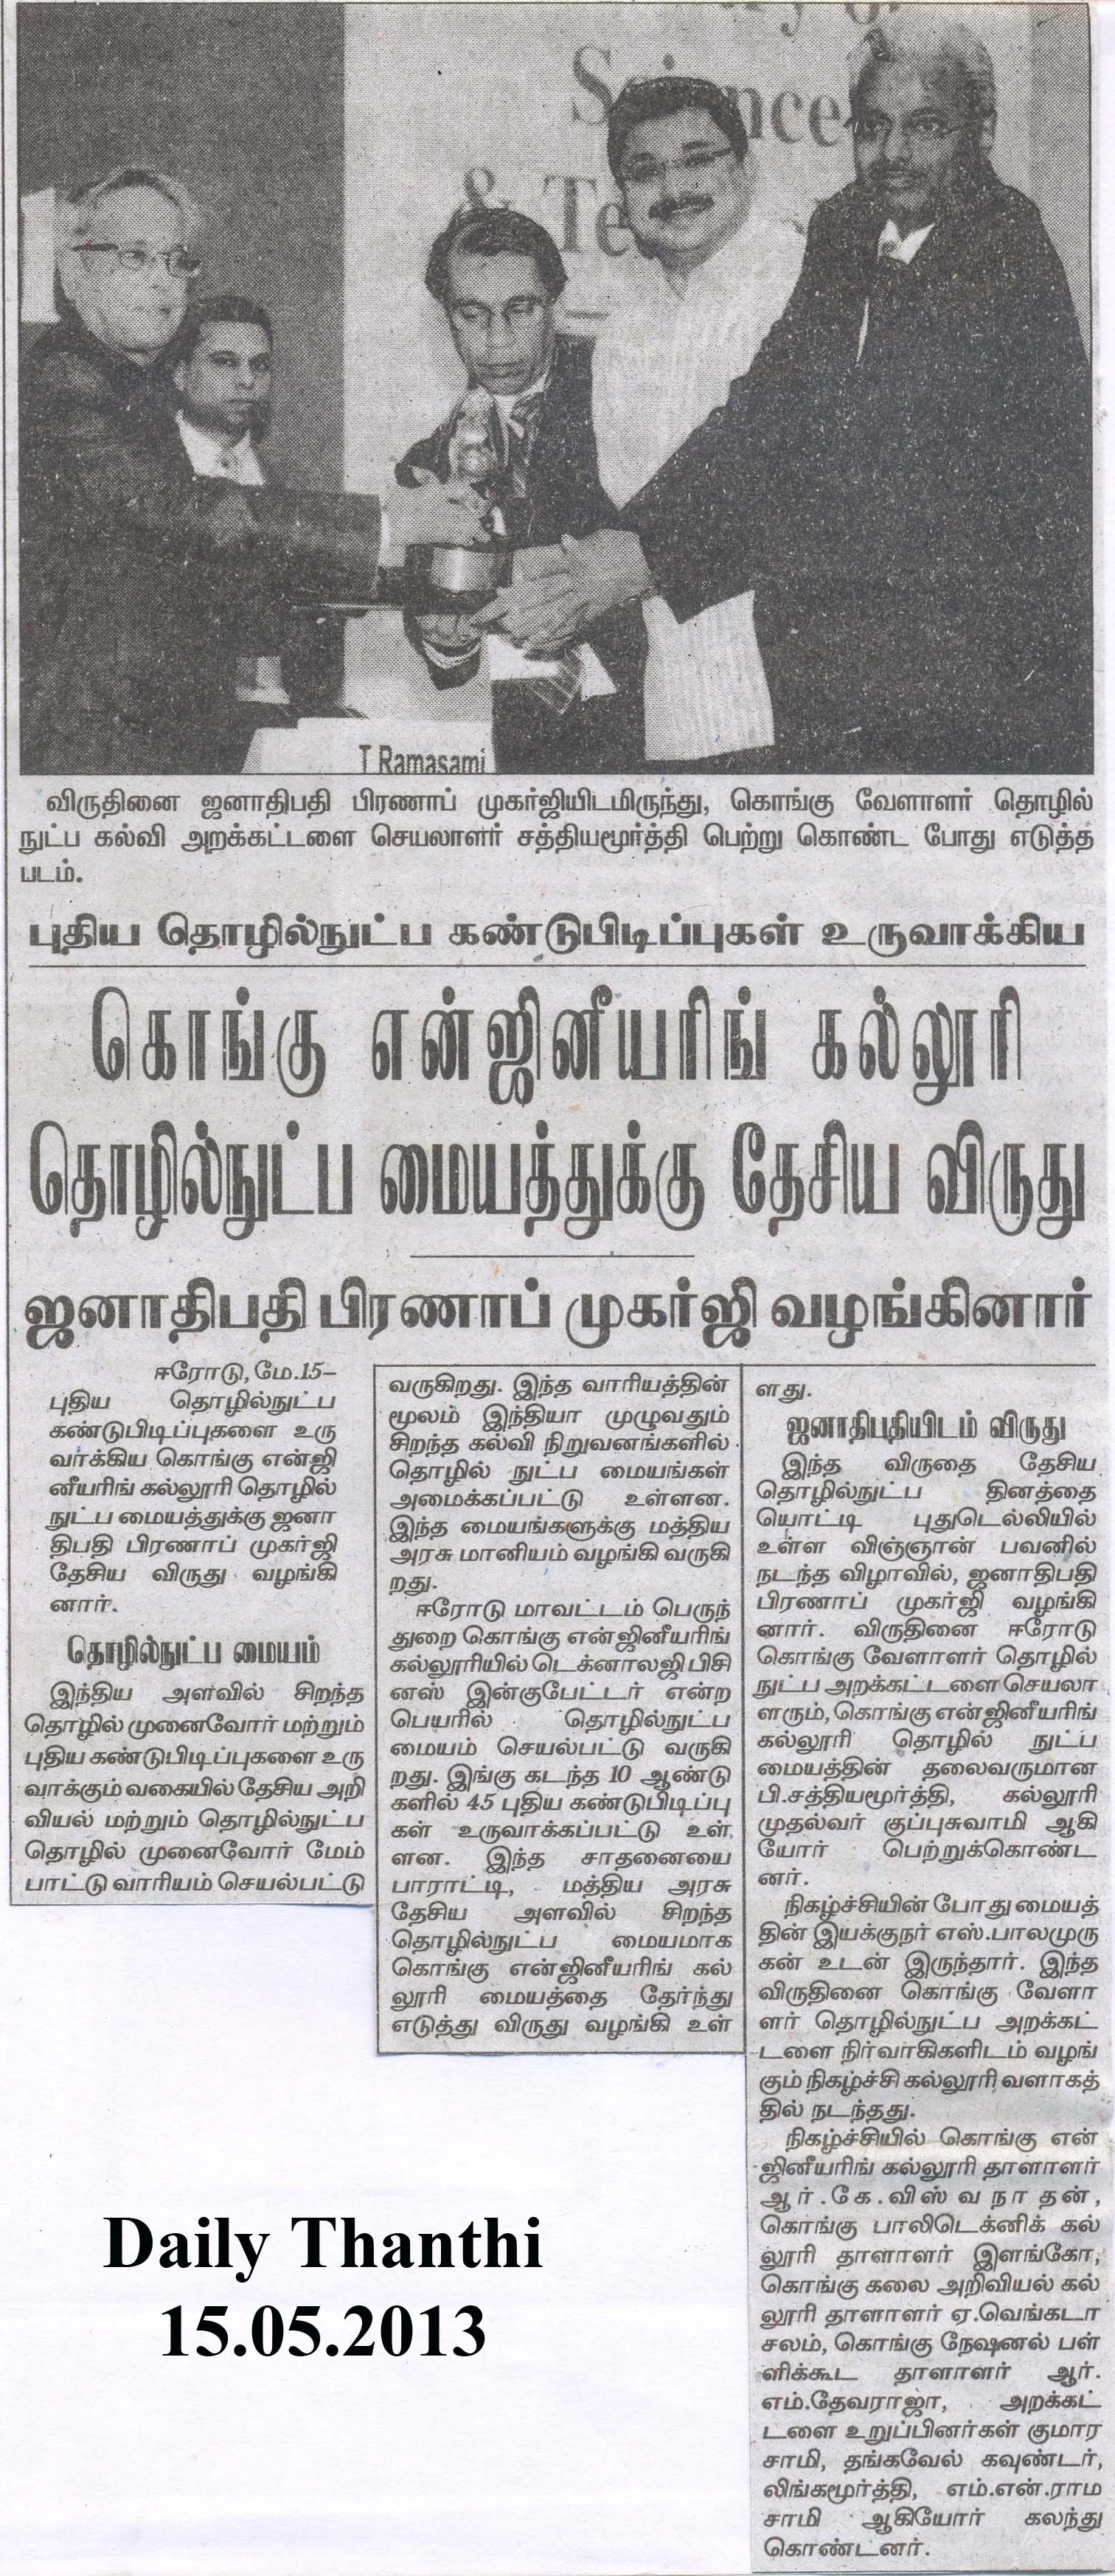 daily thanthi epaper subscription